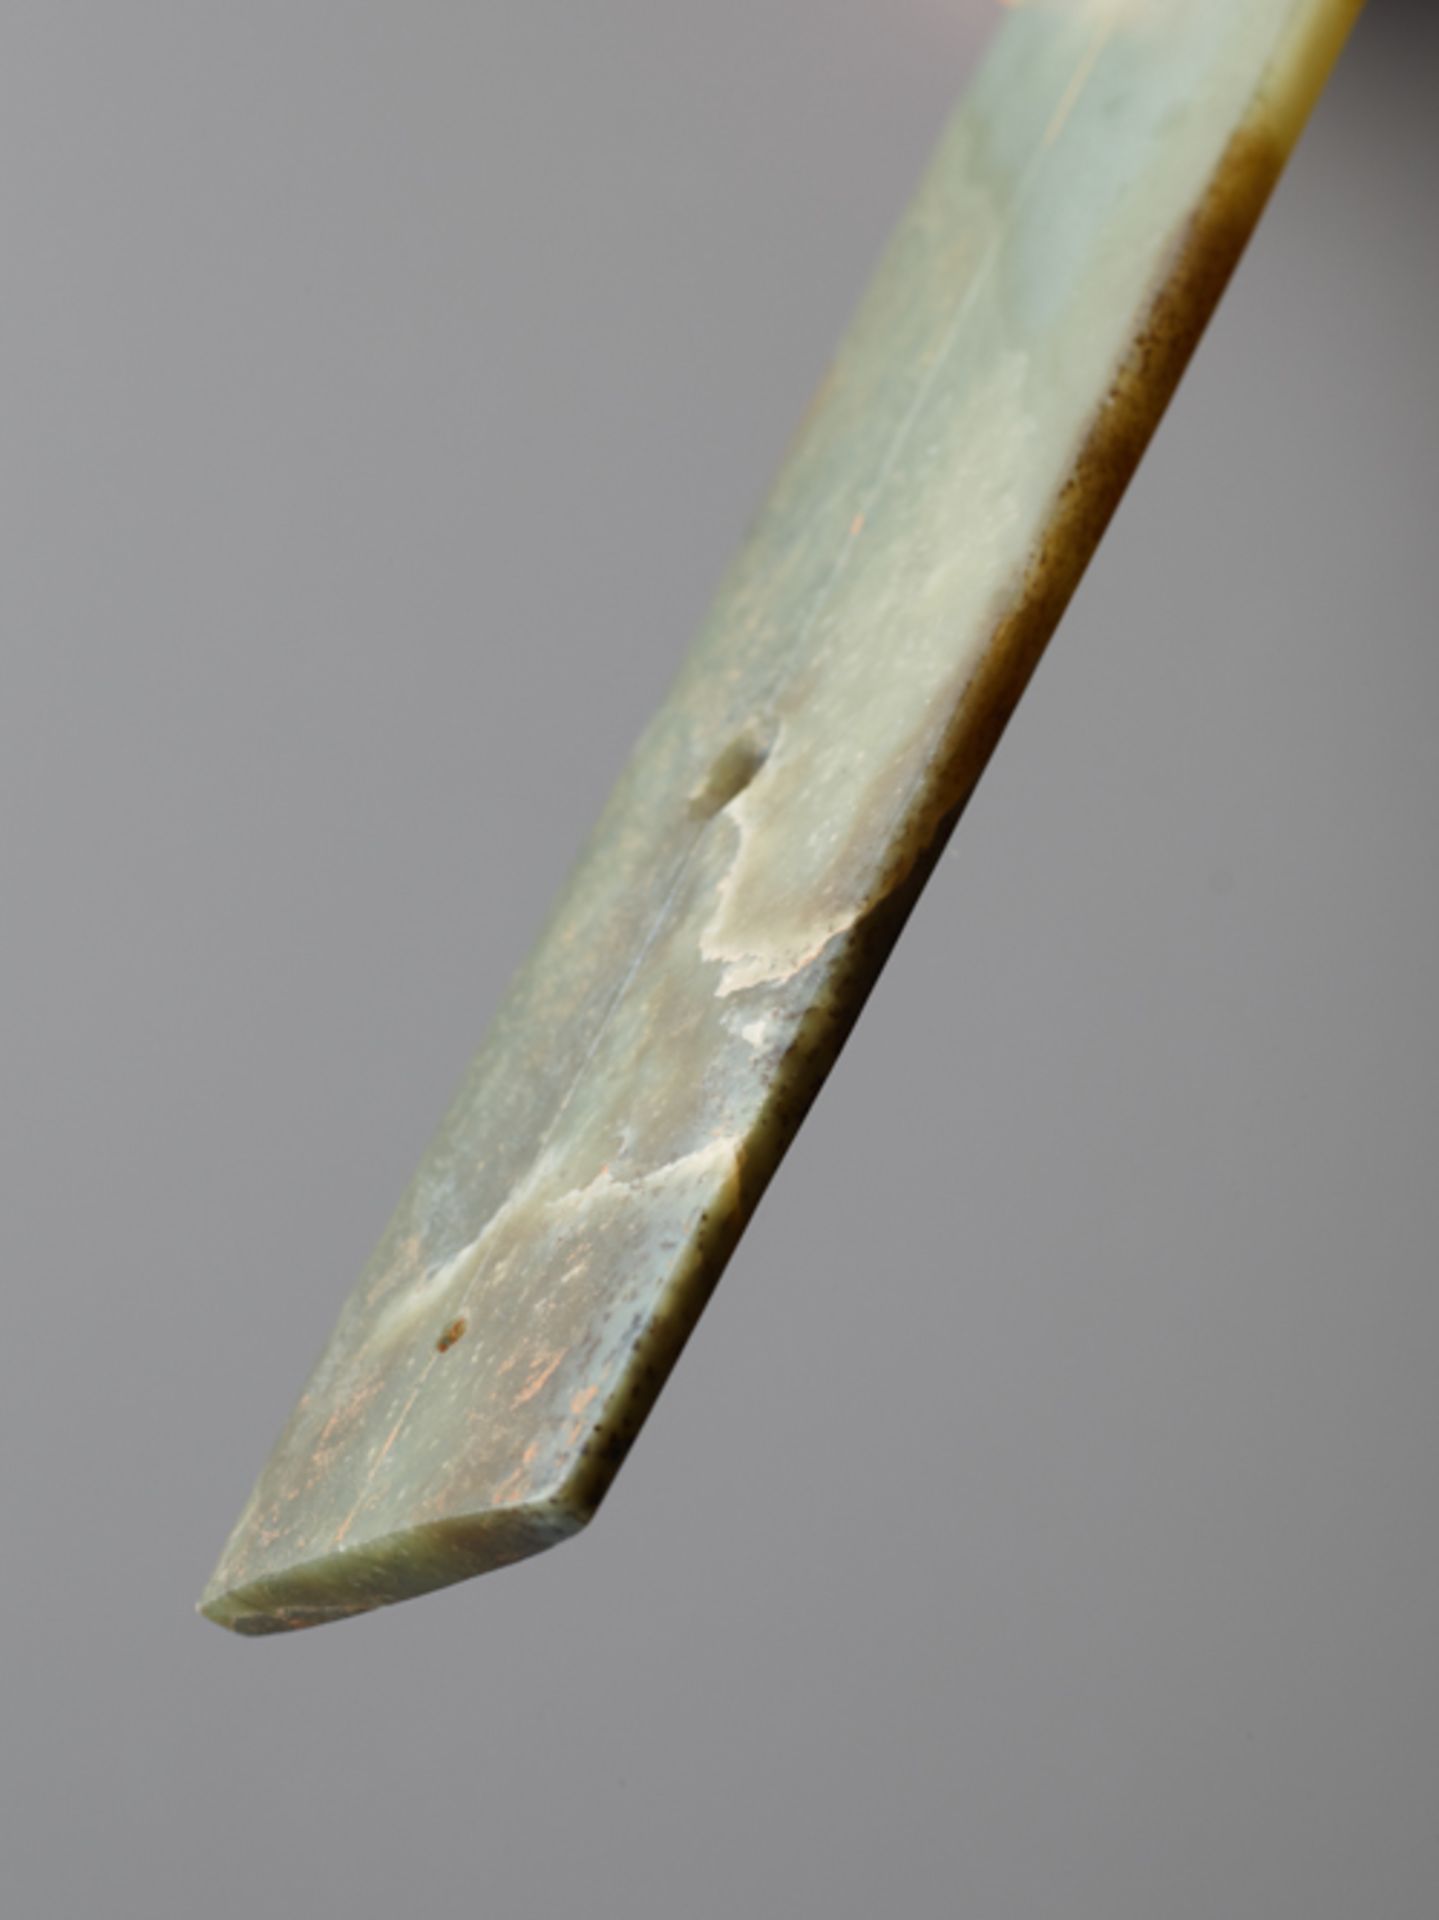 LONG CHISEL-SHAPED BLADEJade. China, Late Neolithic period, Qijia culture, c.2200-1900 BCThis - Image 6 of 6